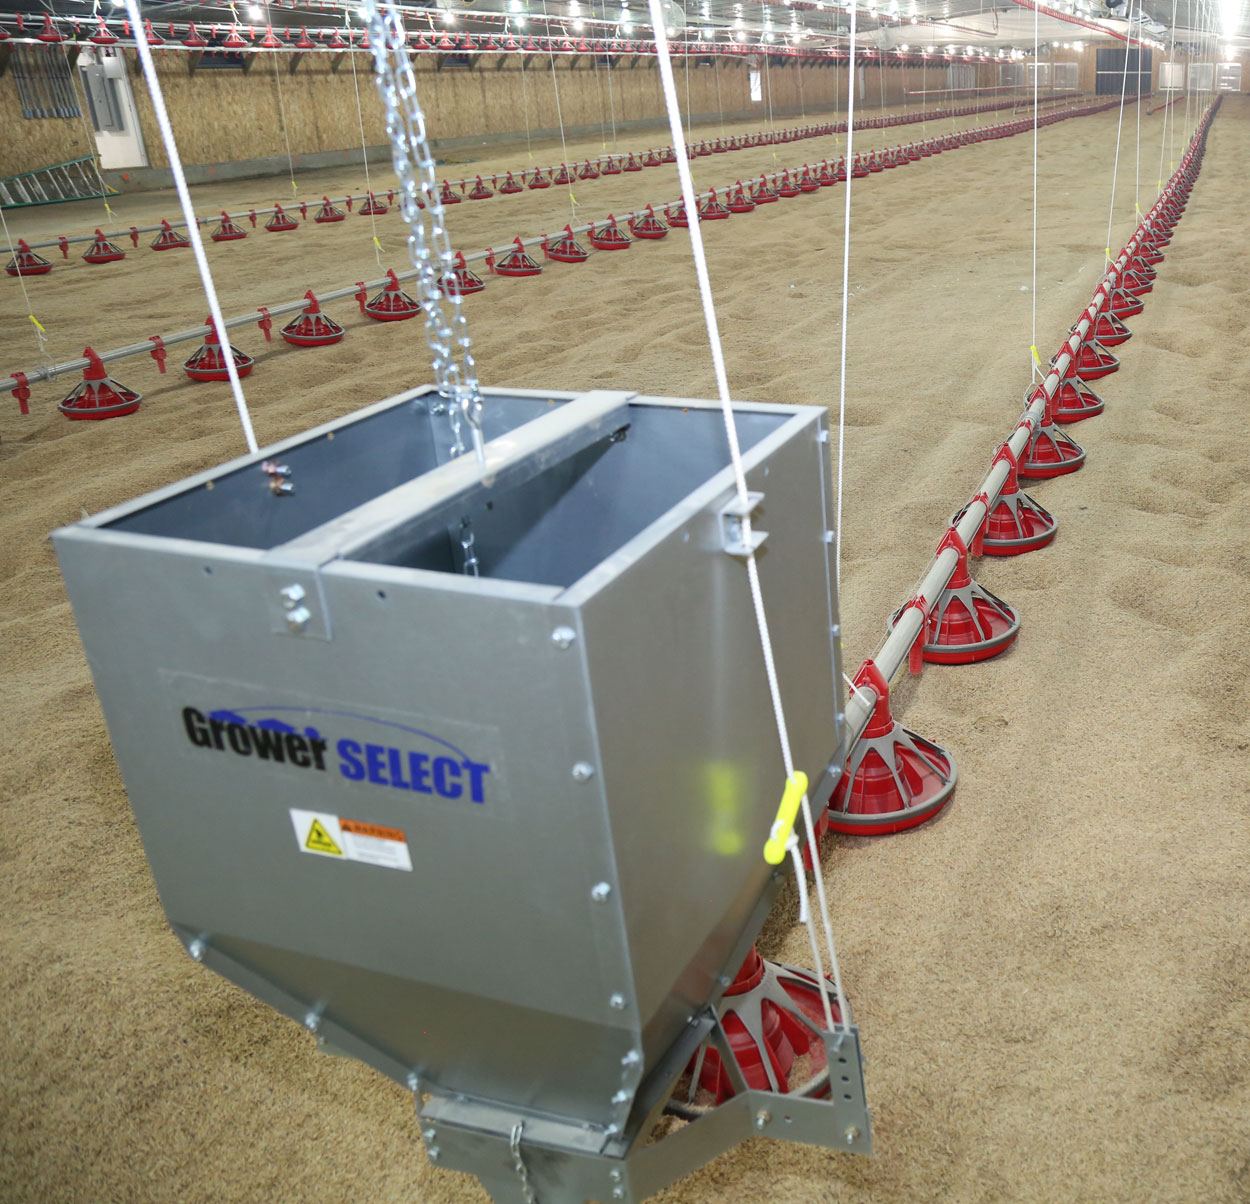 GrowerSELECT® poultry feed system components work together to keep your operation efficient and help maximize the conversion potential of every flock.